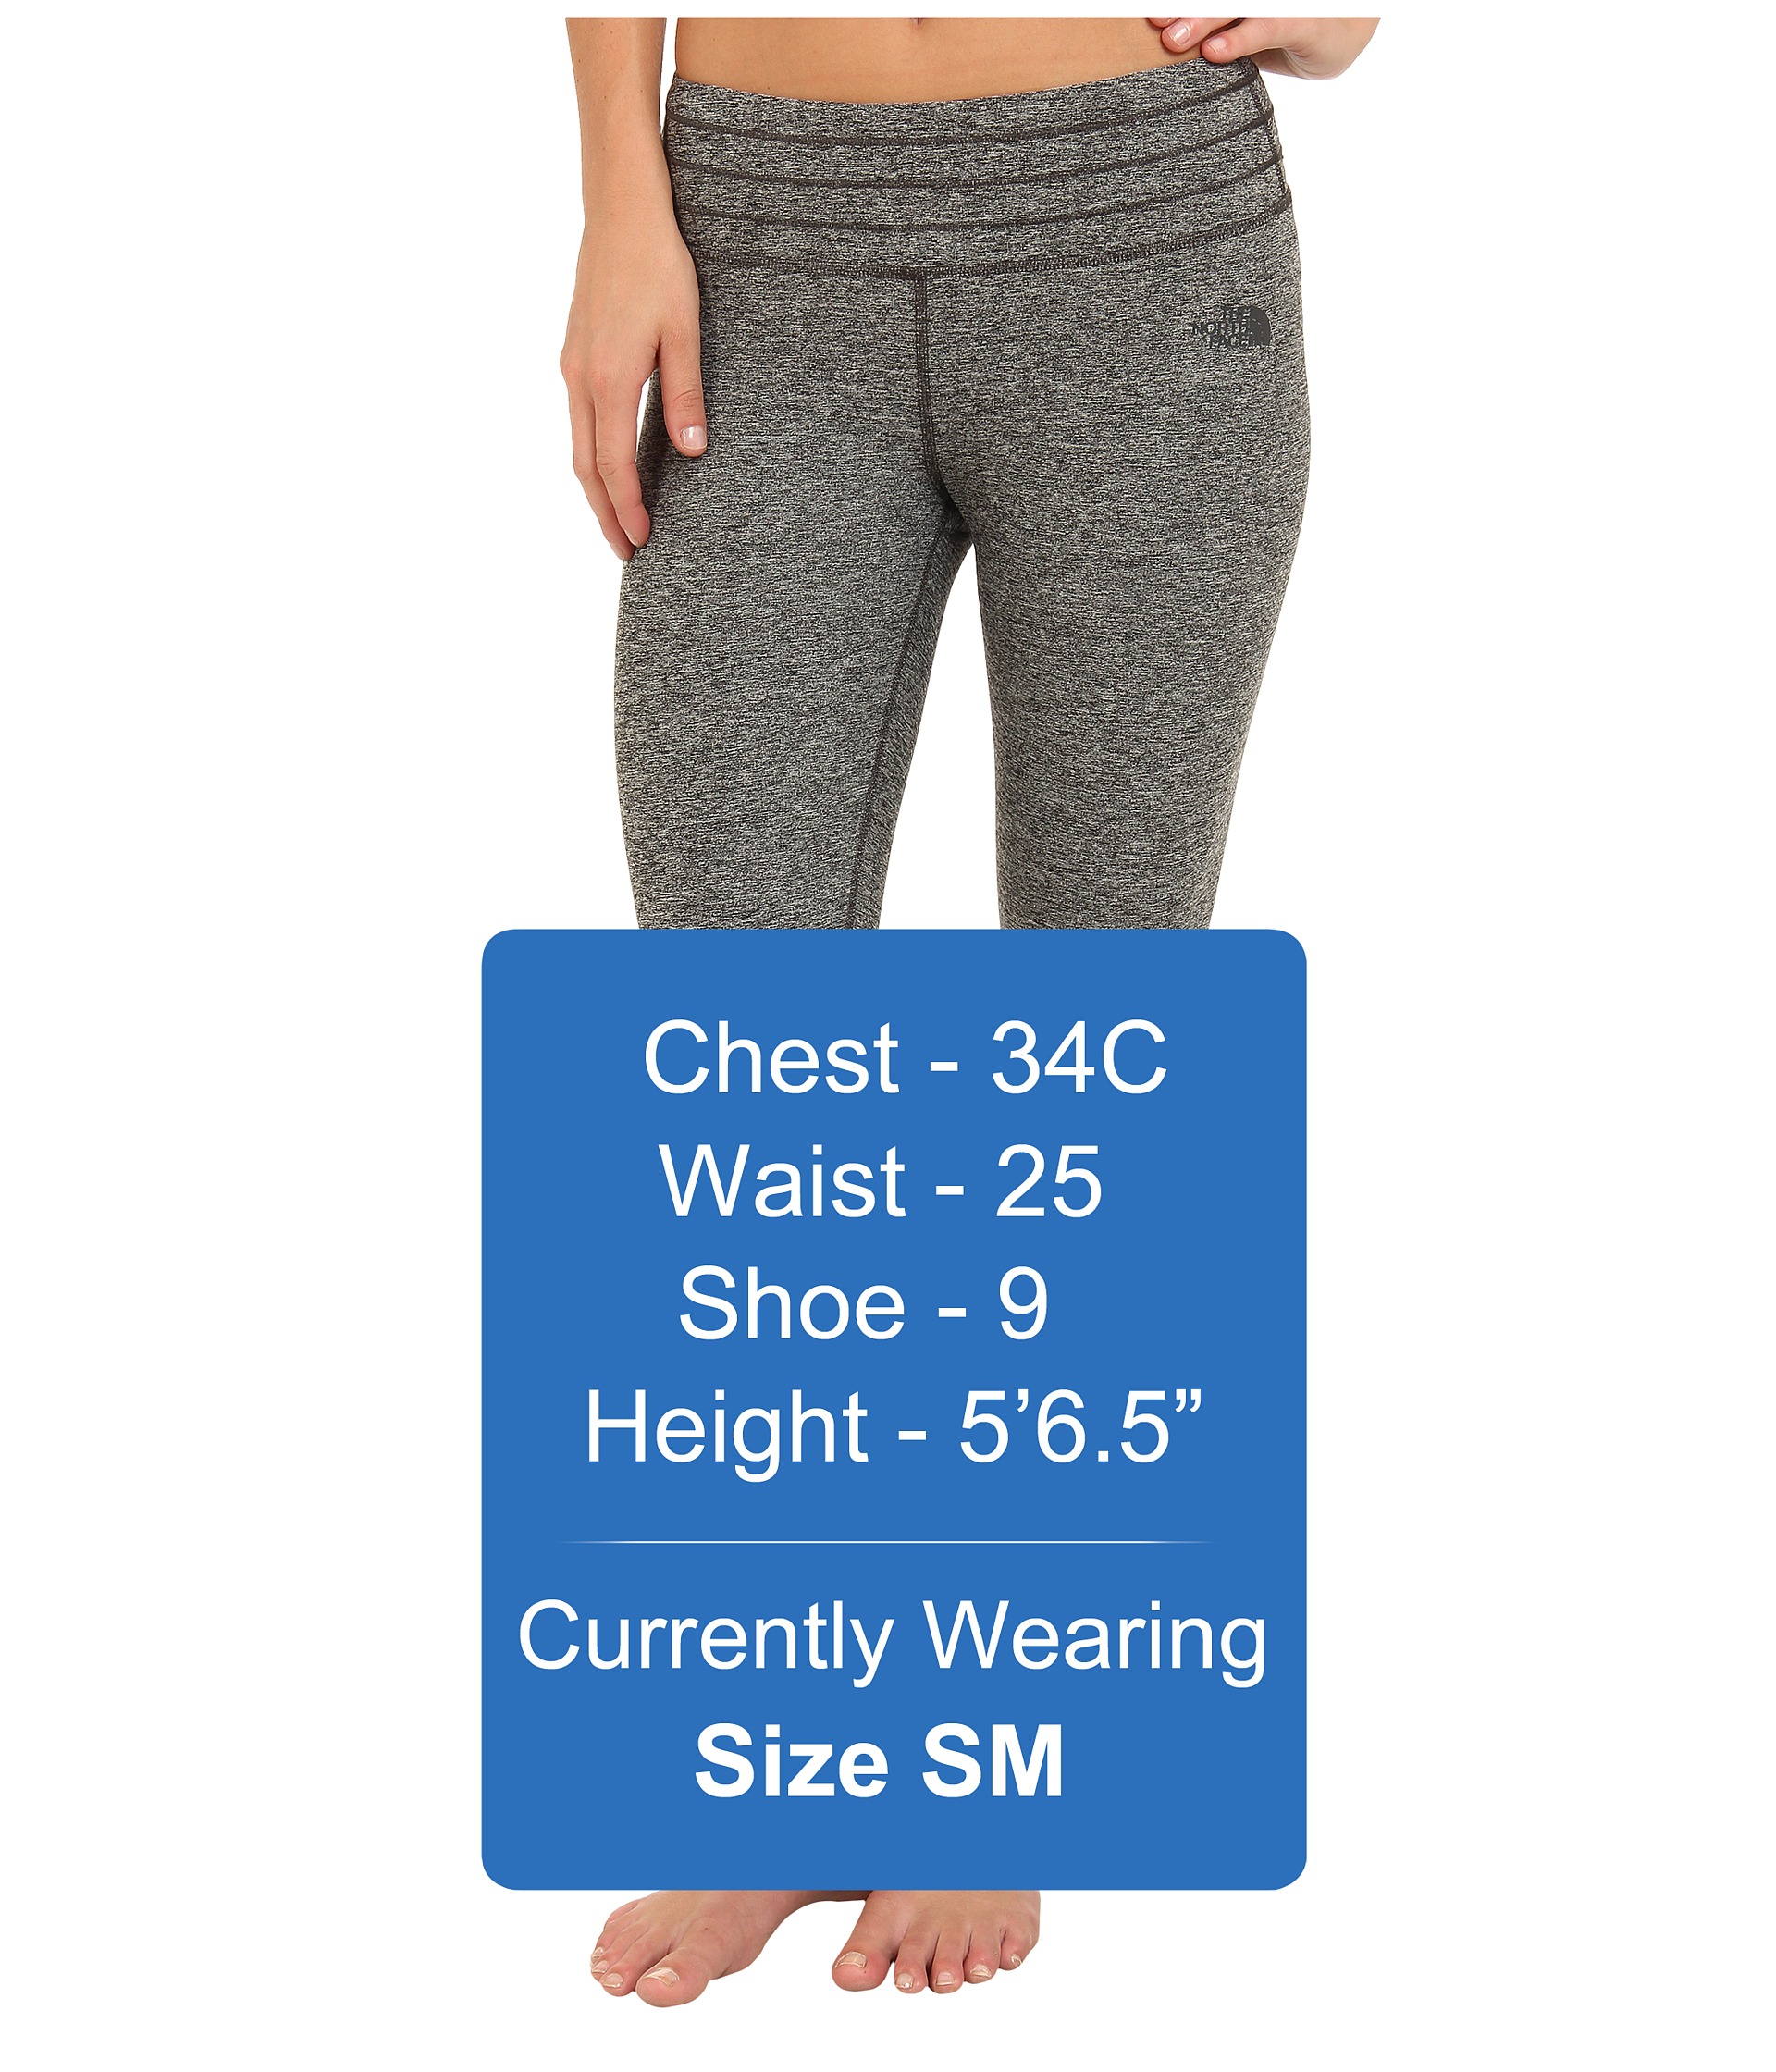 The North Face Motivation Legging at Zappos